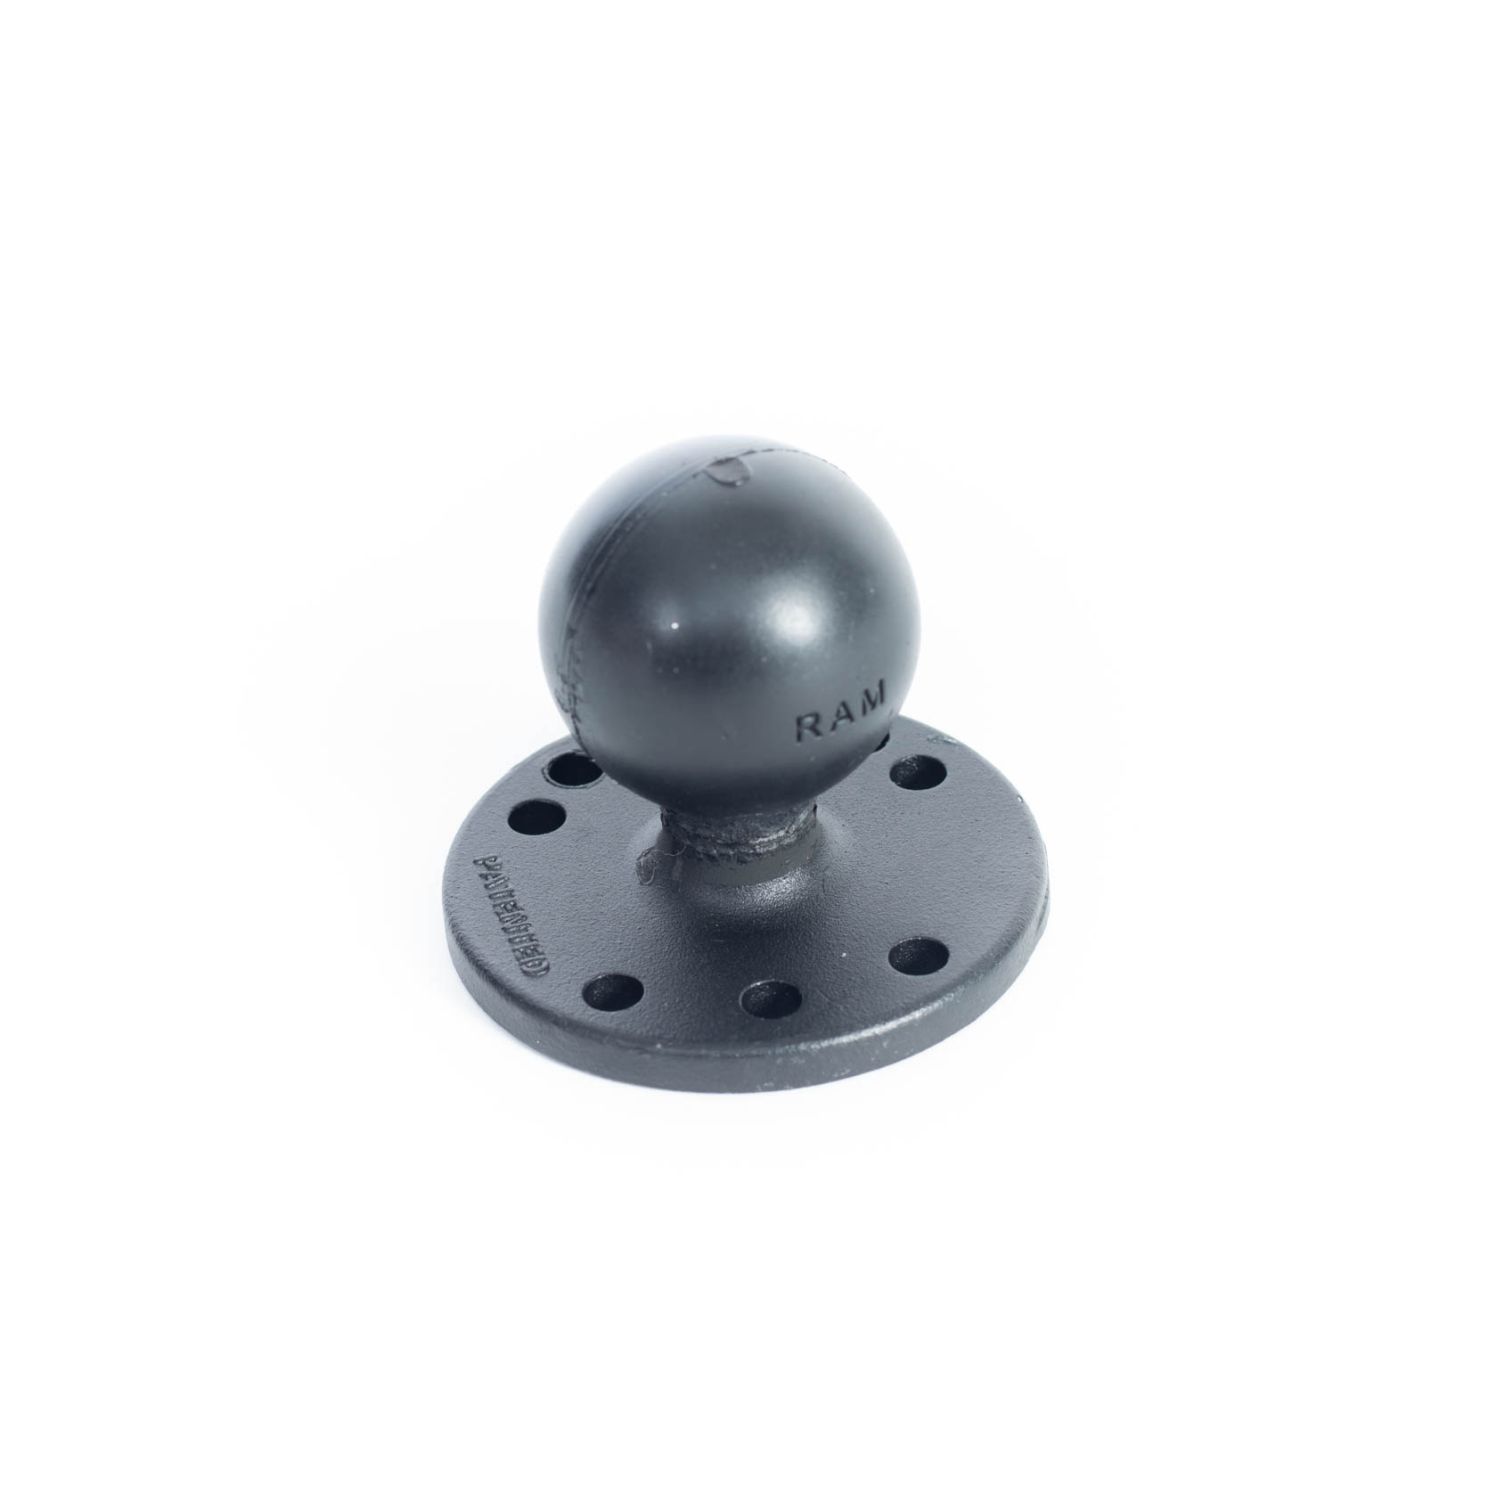 Ram 1.5" C Ball Adapter with Round Plate and Threaded Hole RAM-202CNSU